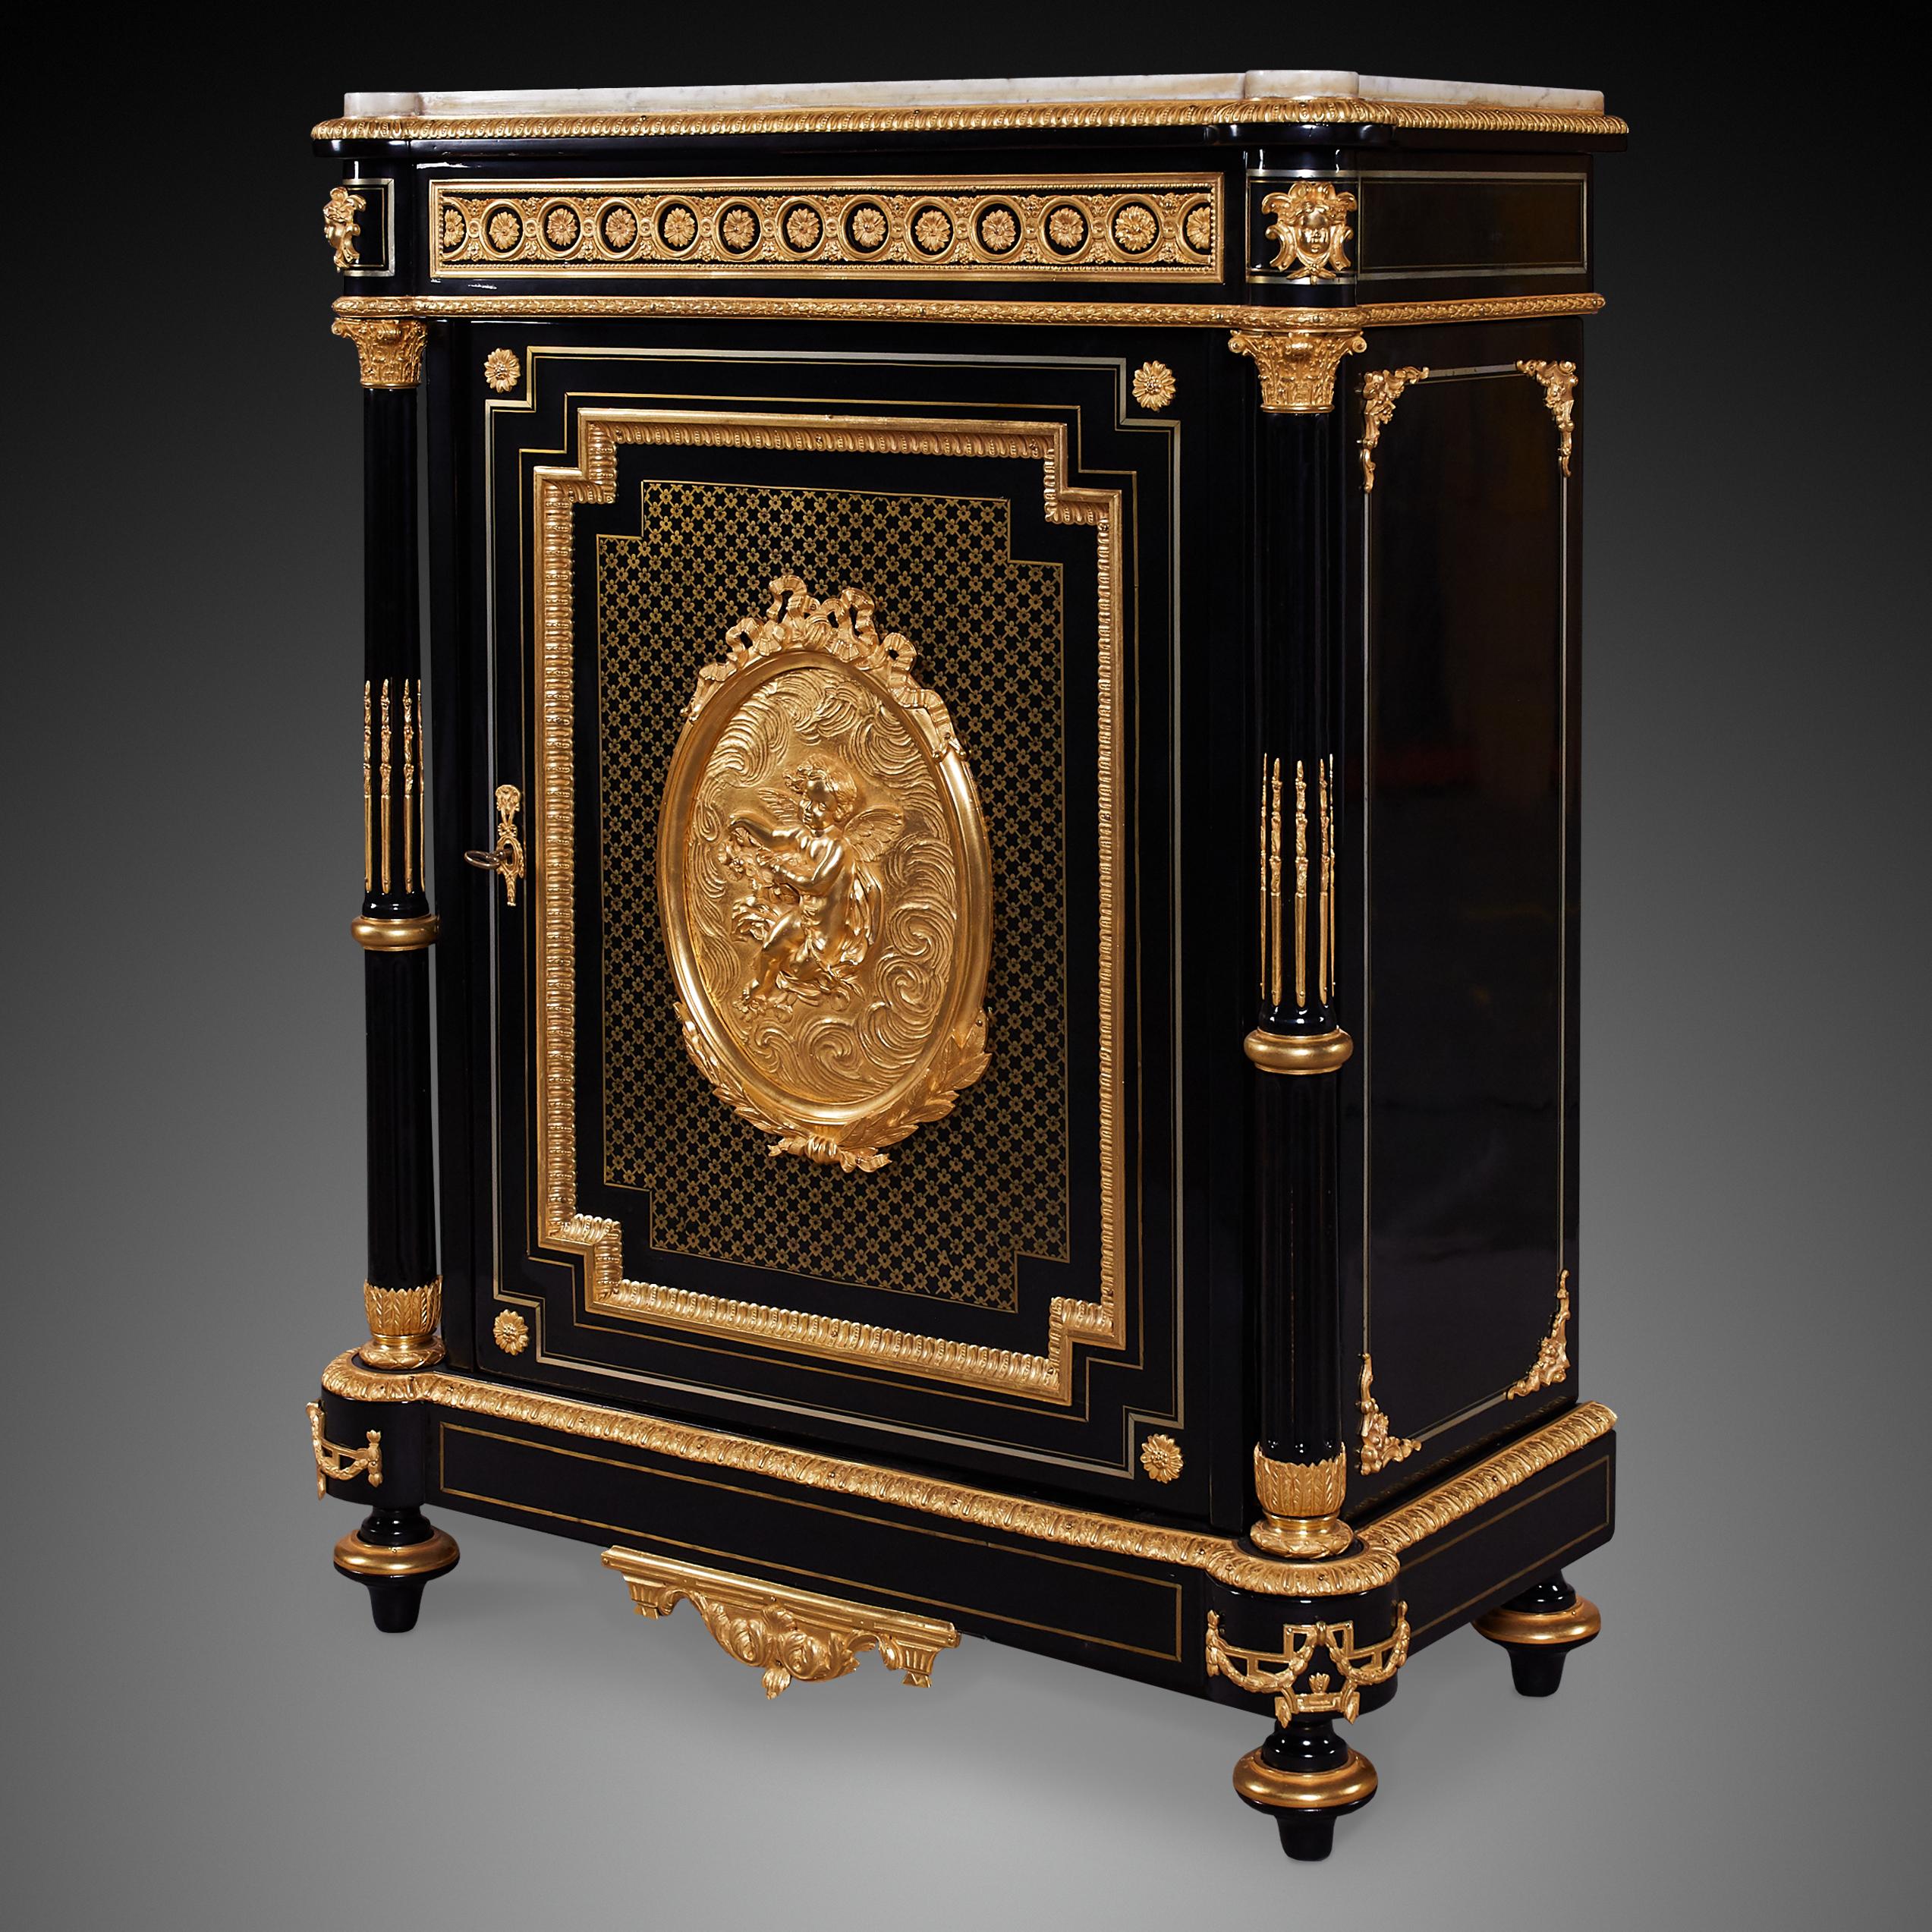 Black ebonised 19th c., Napoleon III style ormolu cabinet. Like many cabinets from this period the cabinet is heavily embellished with ormolu mouldings and decorative patterns with ancient Greco-Roman inspired motifs. The empire style was introduced